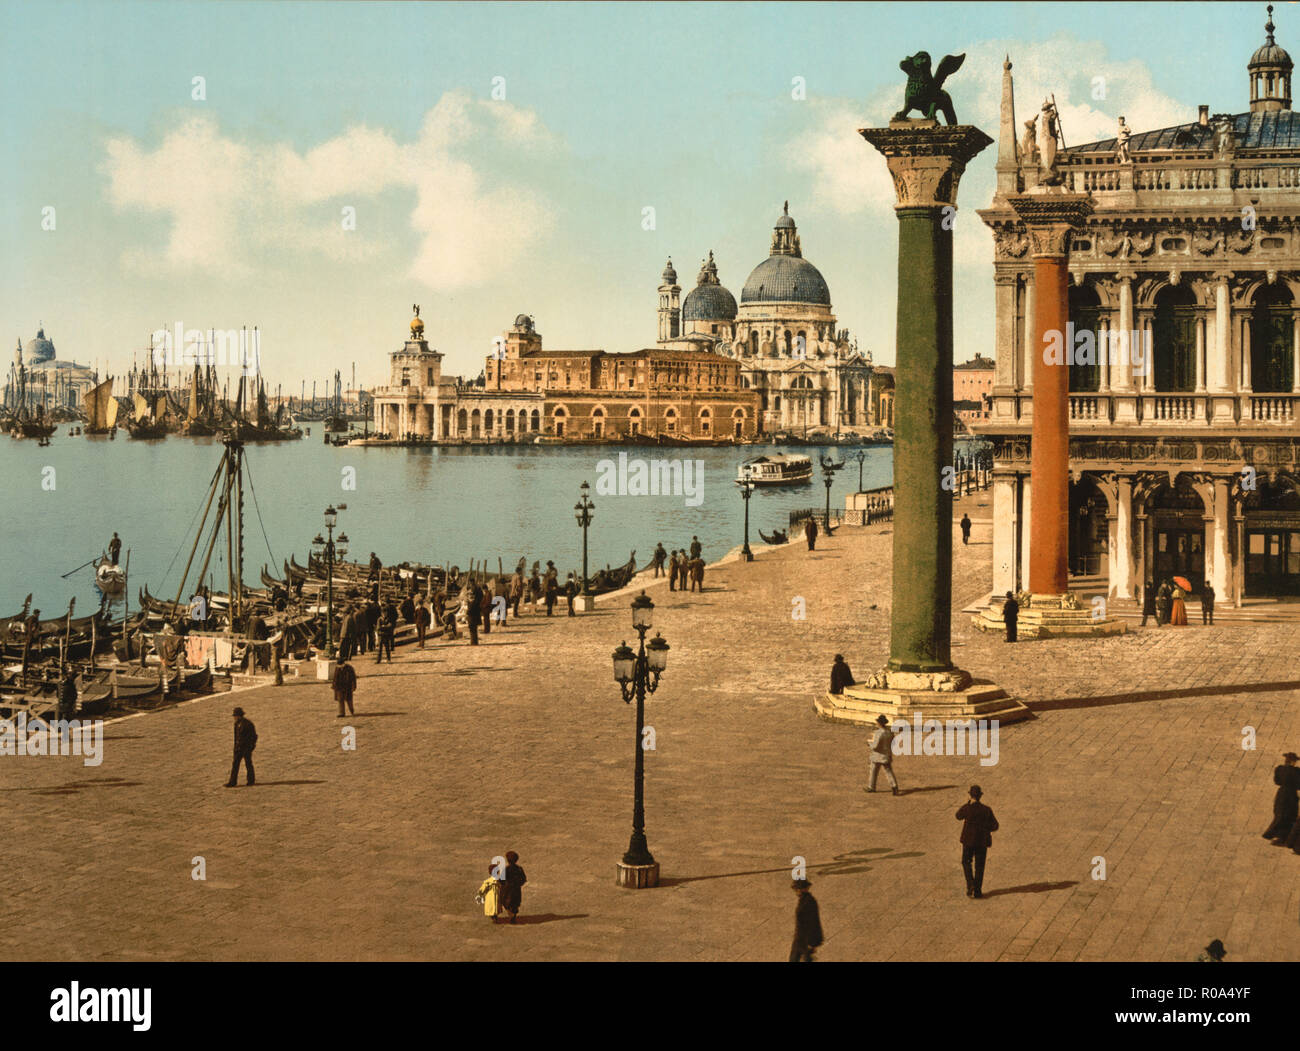 Piazzetta and Columns of St. Mark's, Venice, Italy, Photochrome Print, Detroit Publishing Company, 1900 Stock Photo